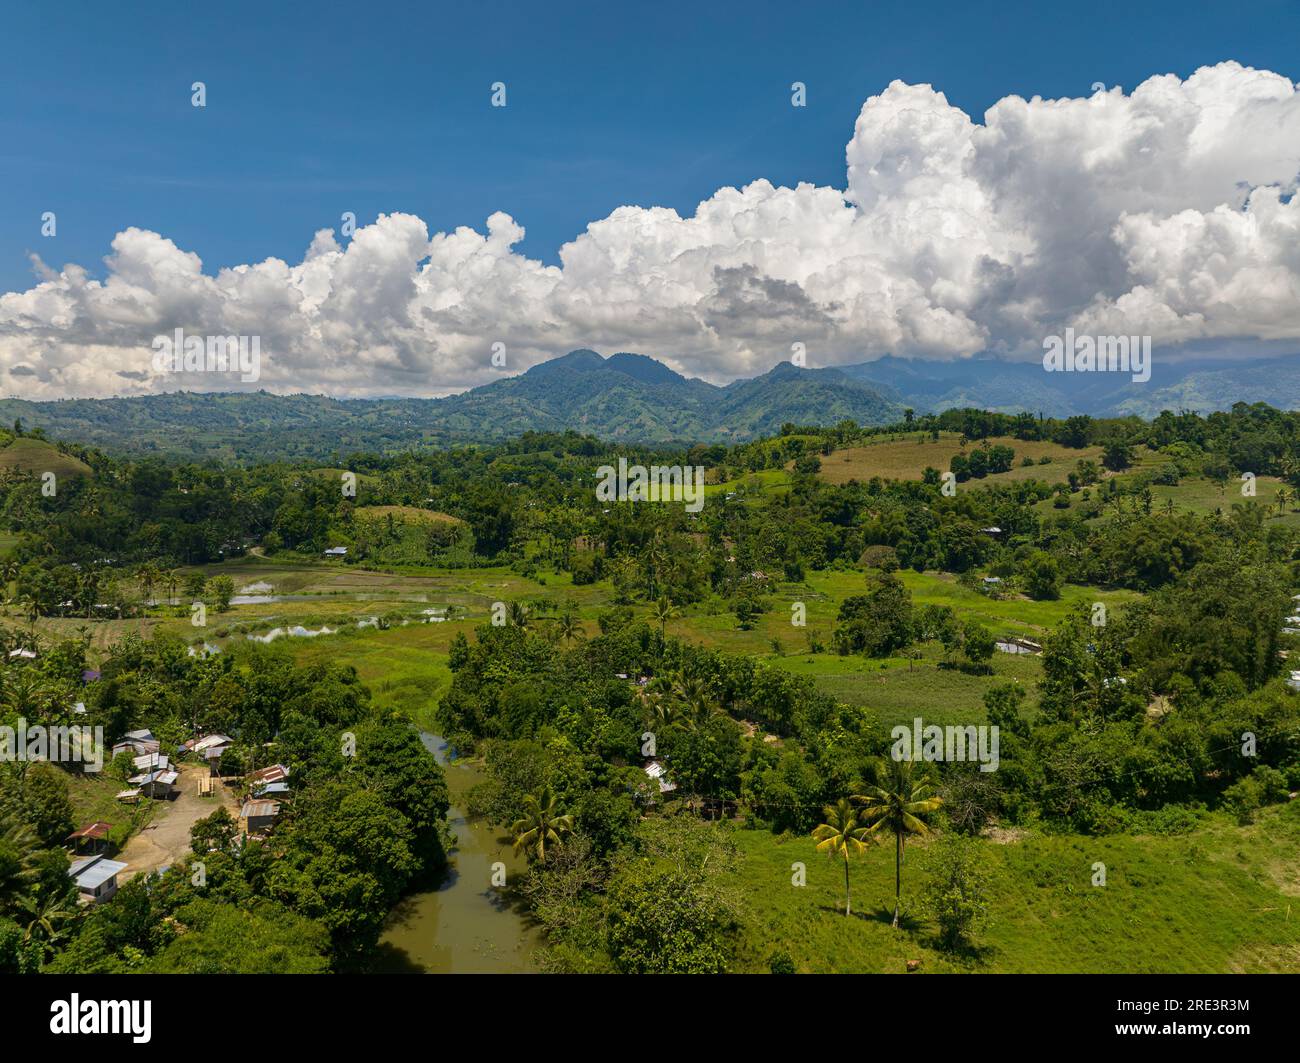 Top view of mountains with green forests and agricultural land with farm plantations. Mindanao, Philippines Stock Photo